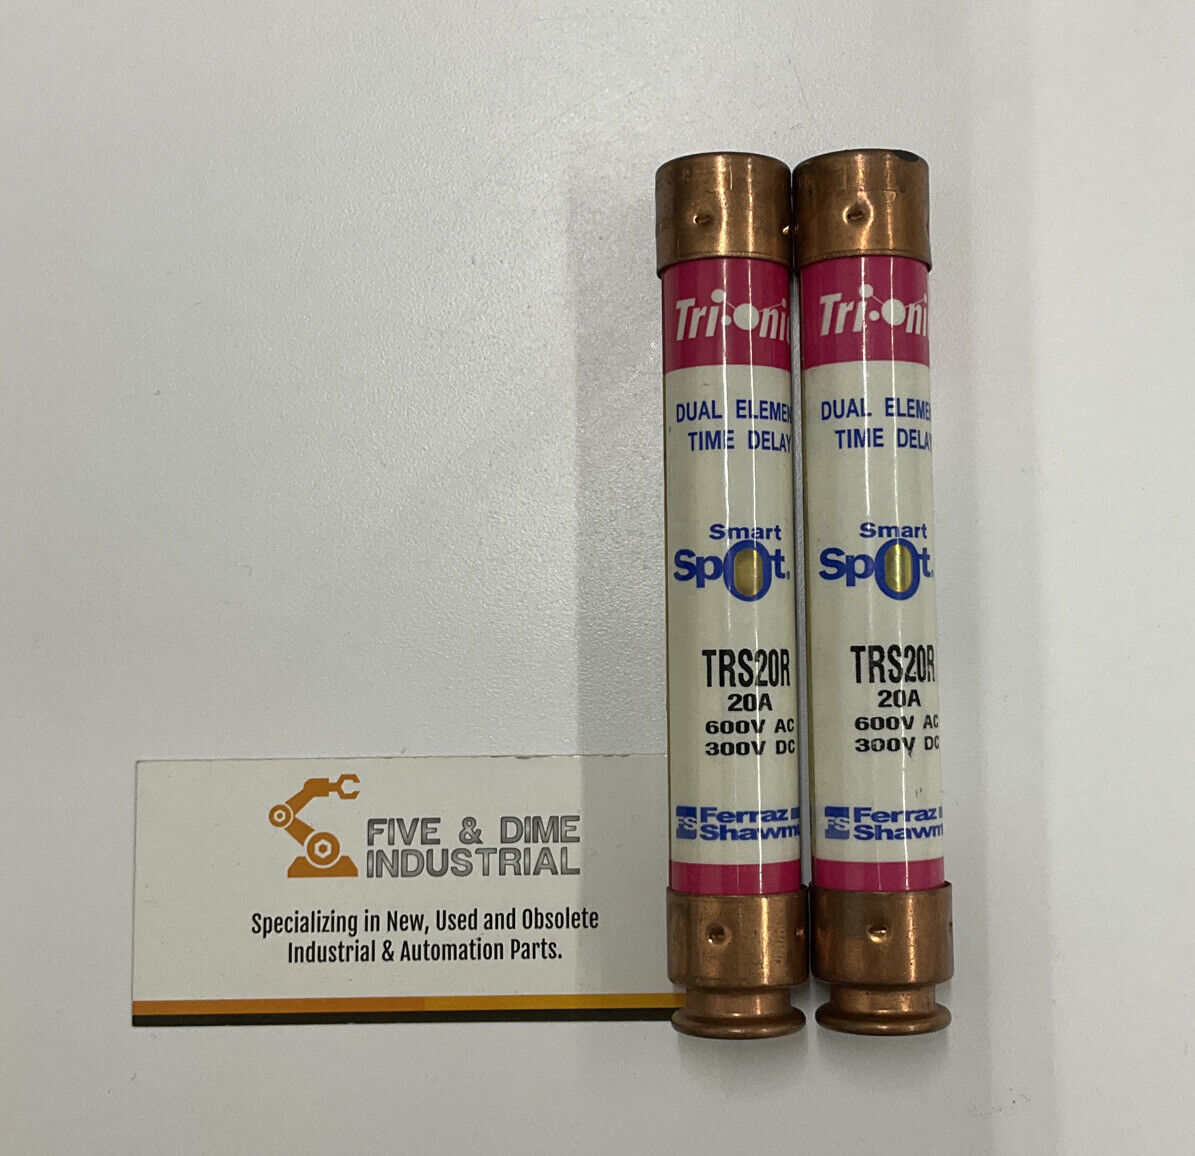 Gould Shawmut Tri-Onic TRS20R  Lot of (2) Time Delay Fuses (CL113)